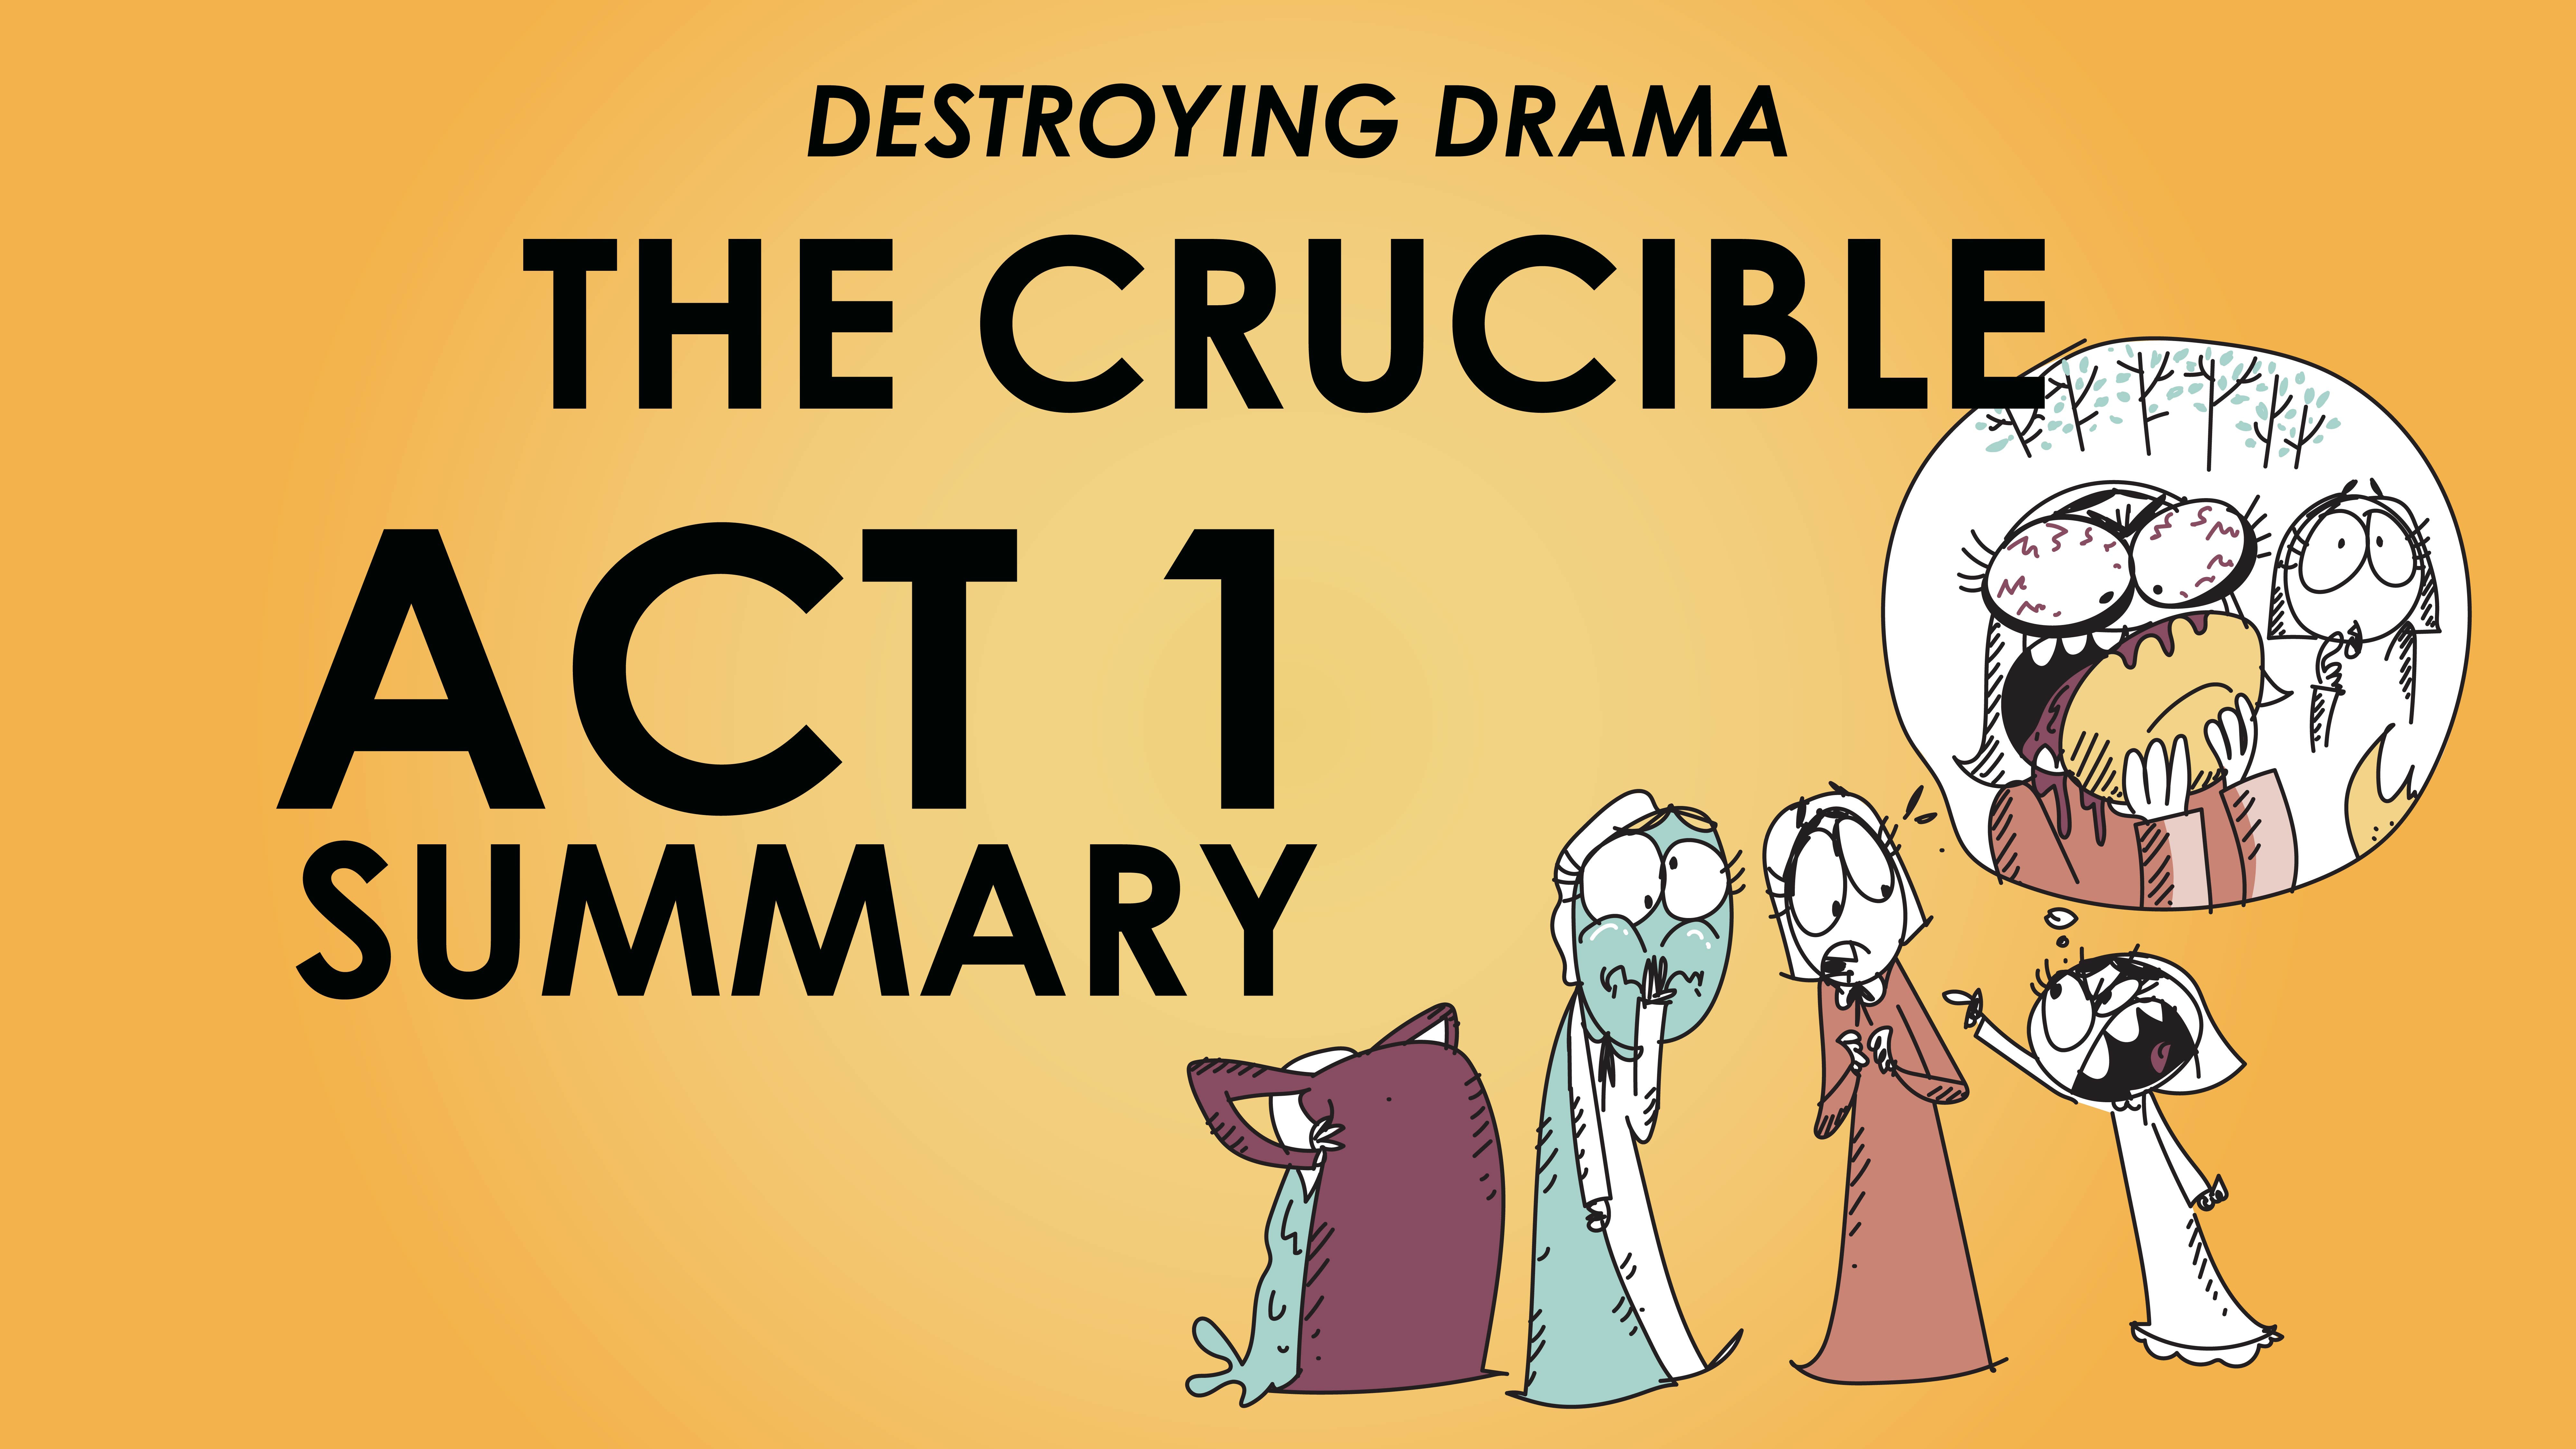 hysteria in the crucible act 2